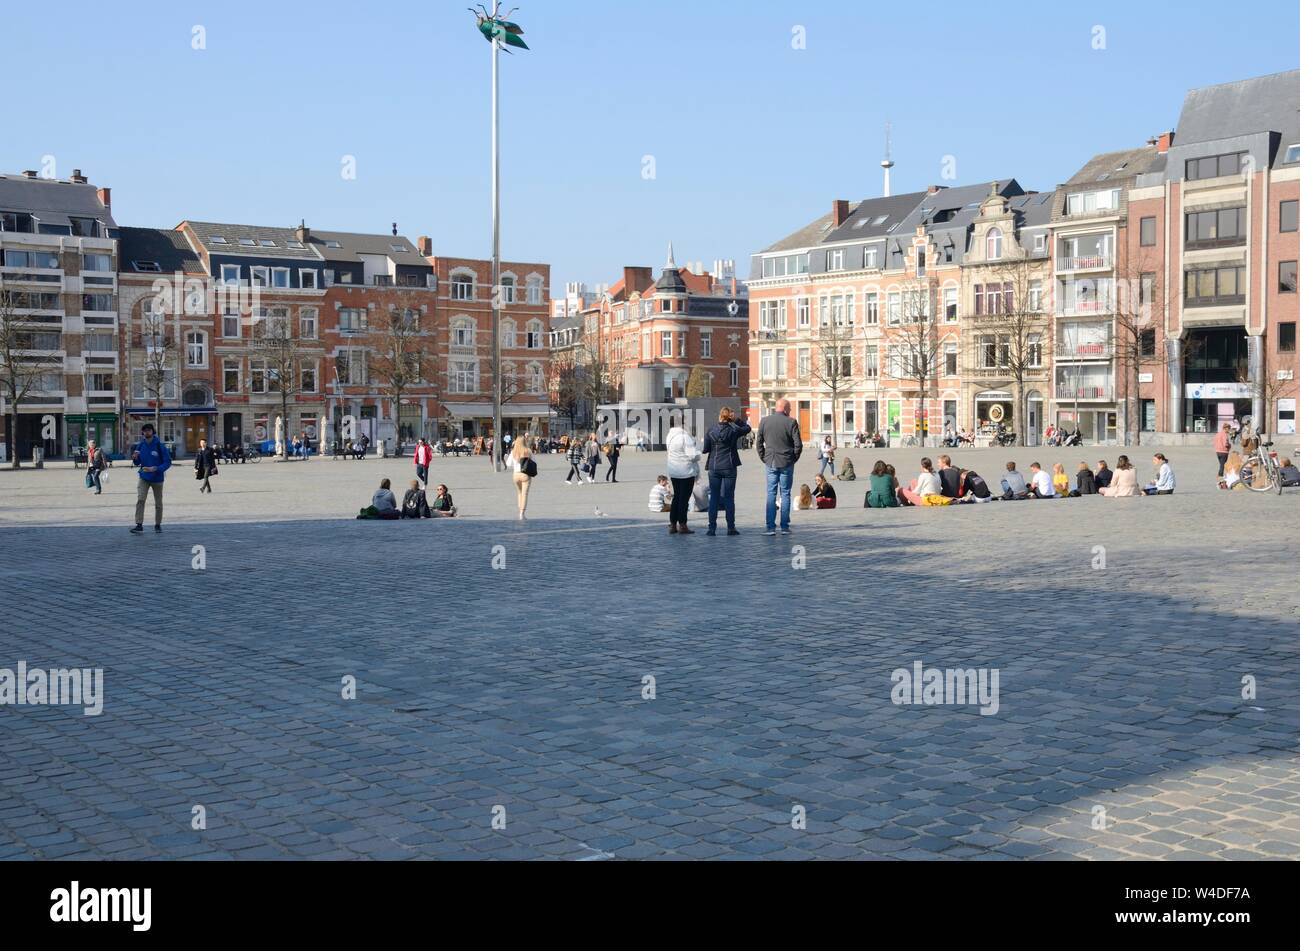 Leuven, Belgium - April 1, 2019: People at the big square where is located a giant shiny green beetle sculpture, a work by Belgian artist Jan Fabre, i Stock Photo